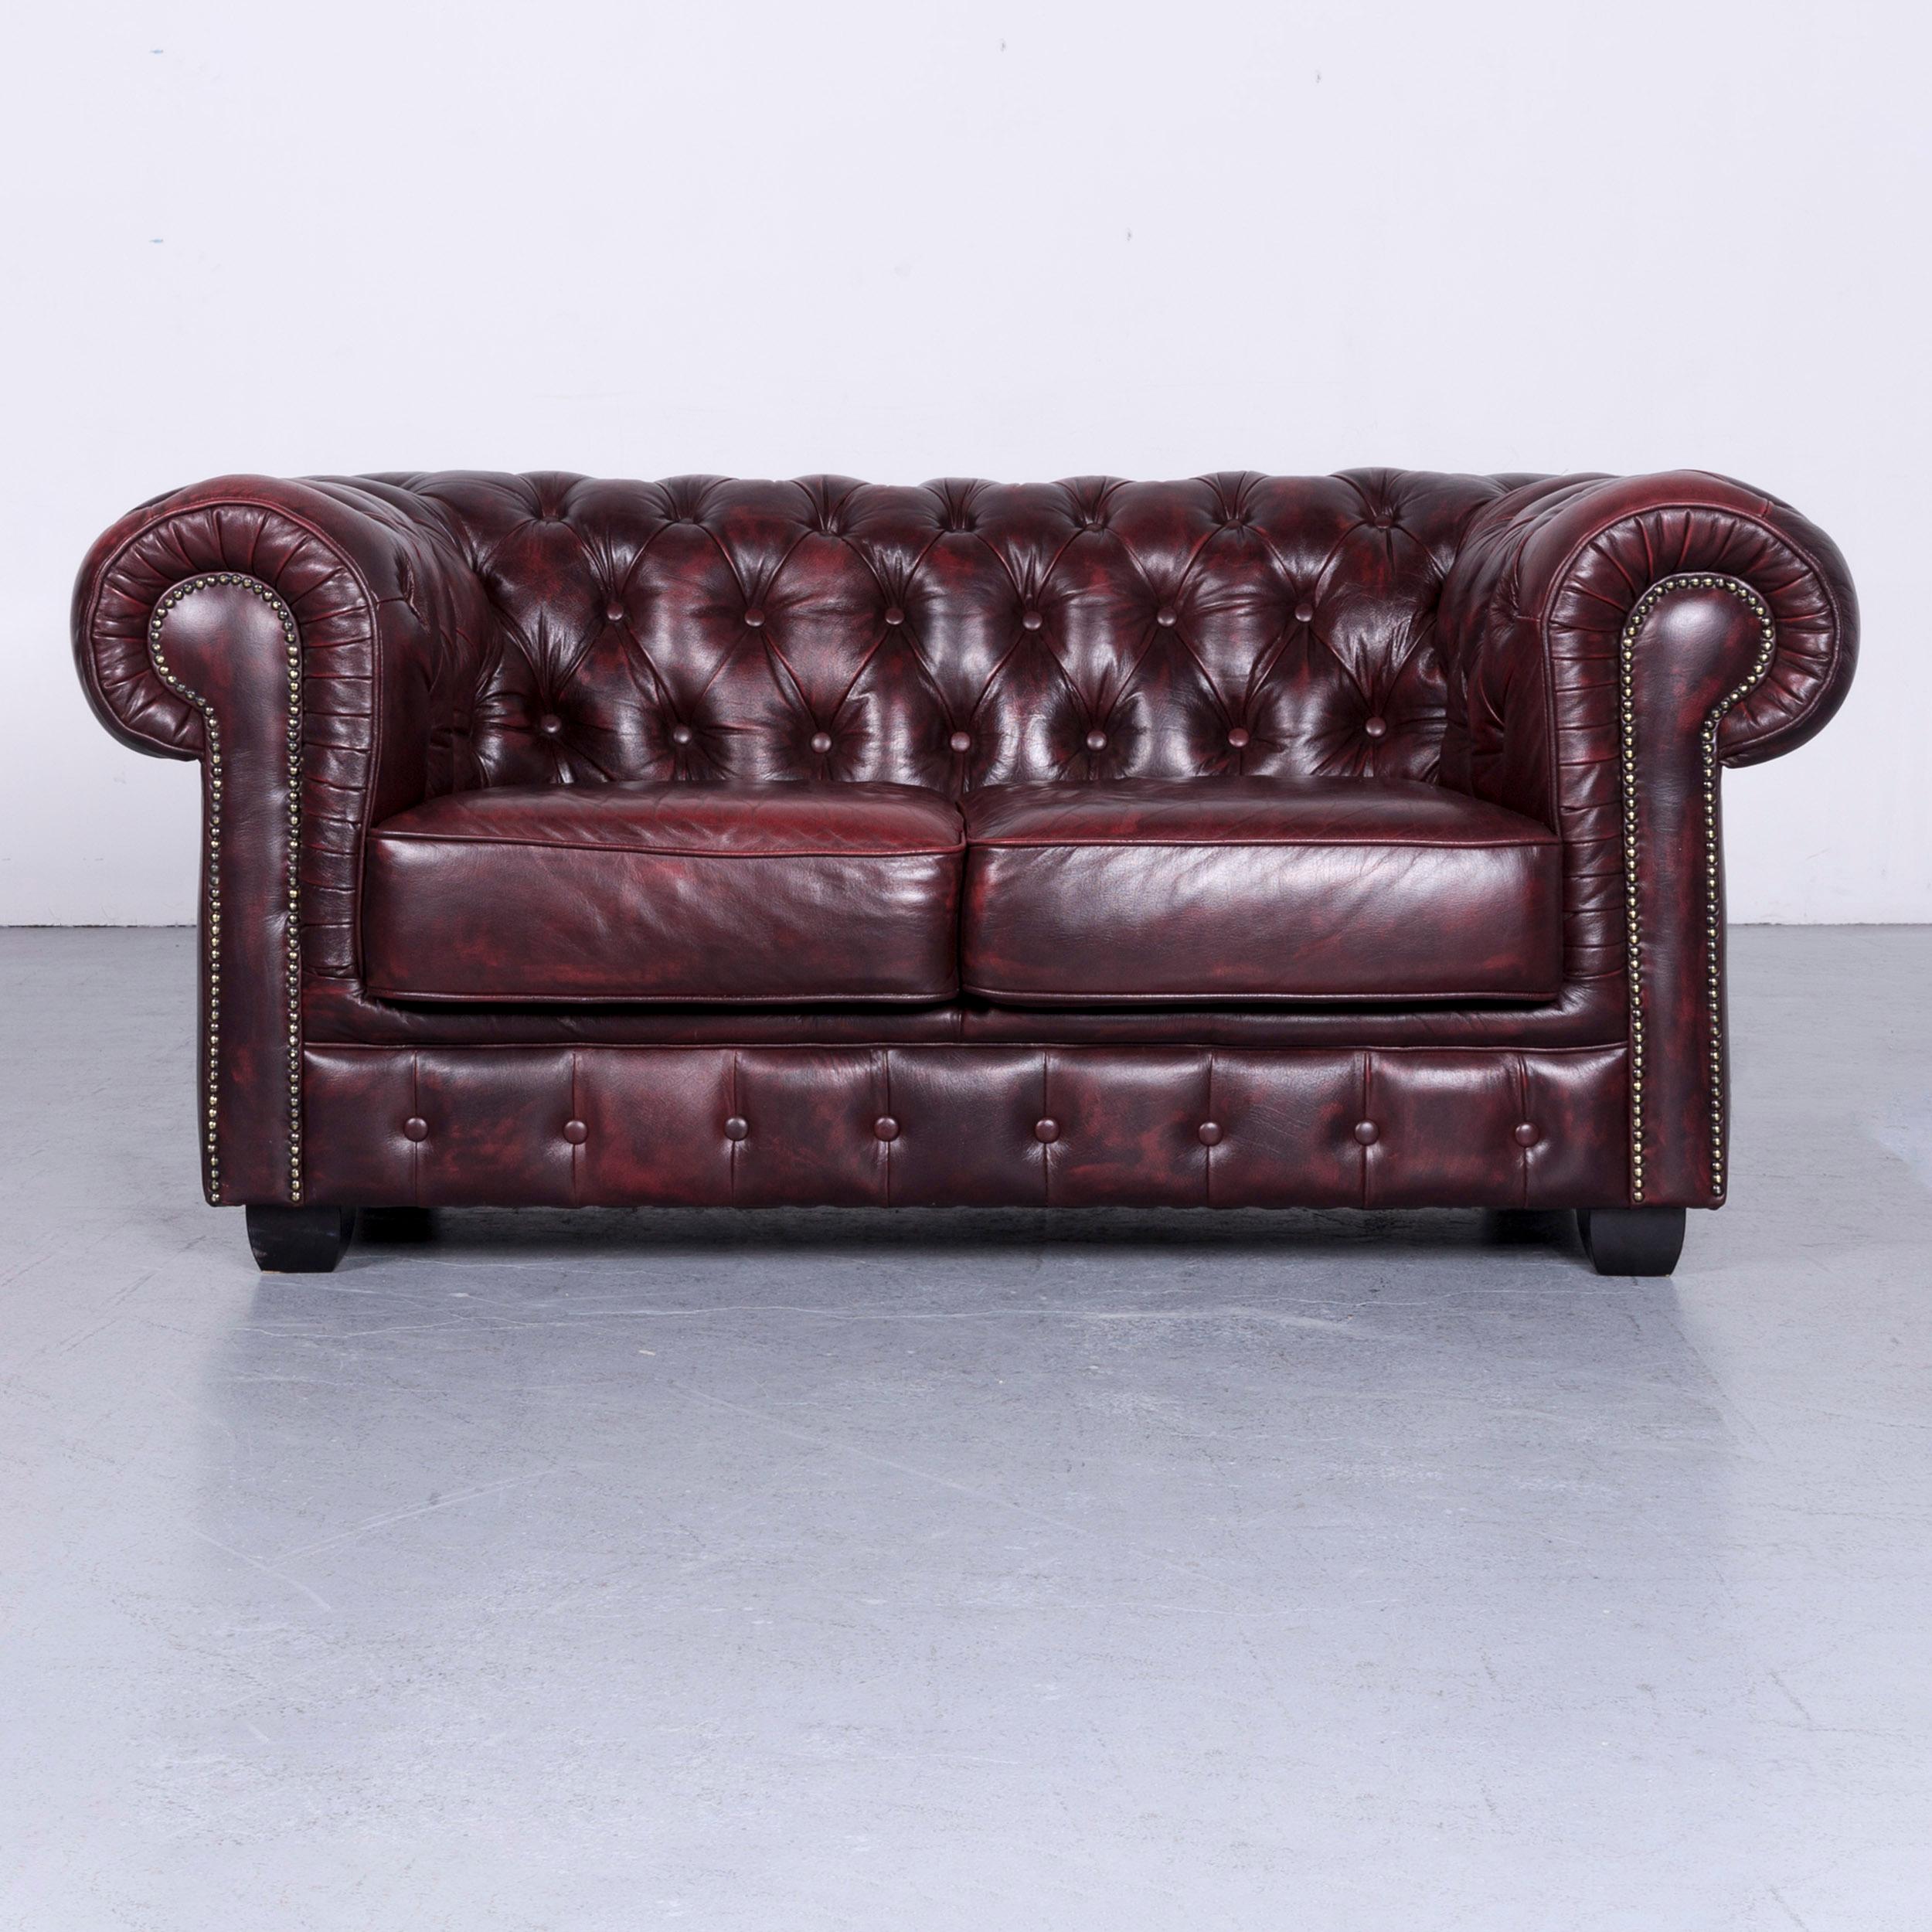 Chesterfield Leather Sofa Brown Three-Seat Couch Vintage Retro 7